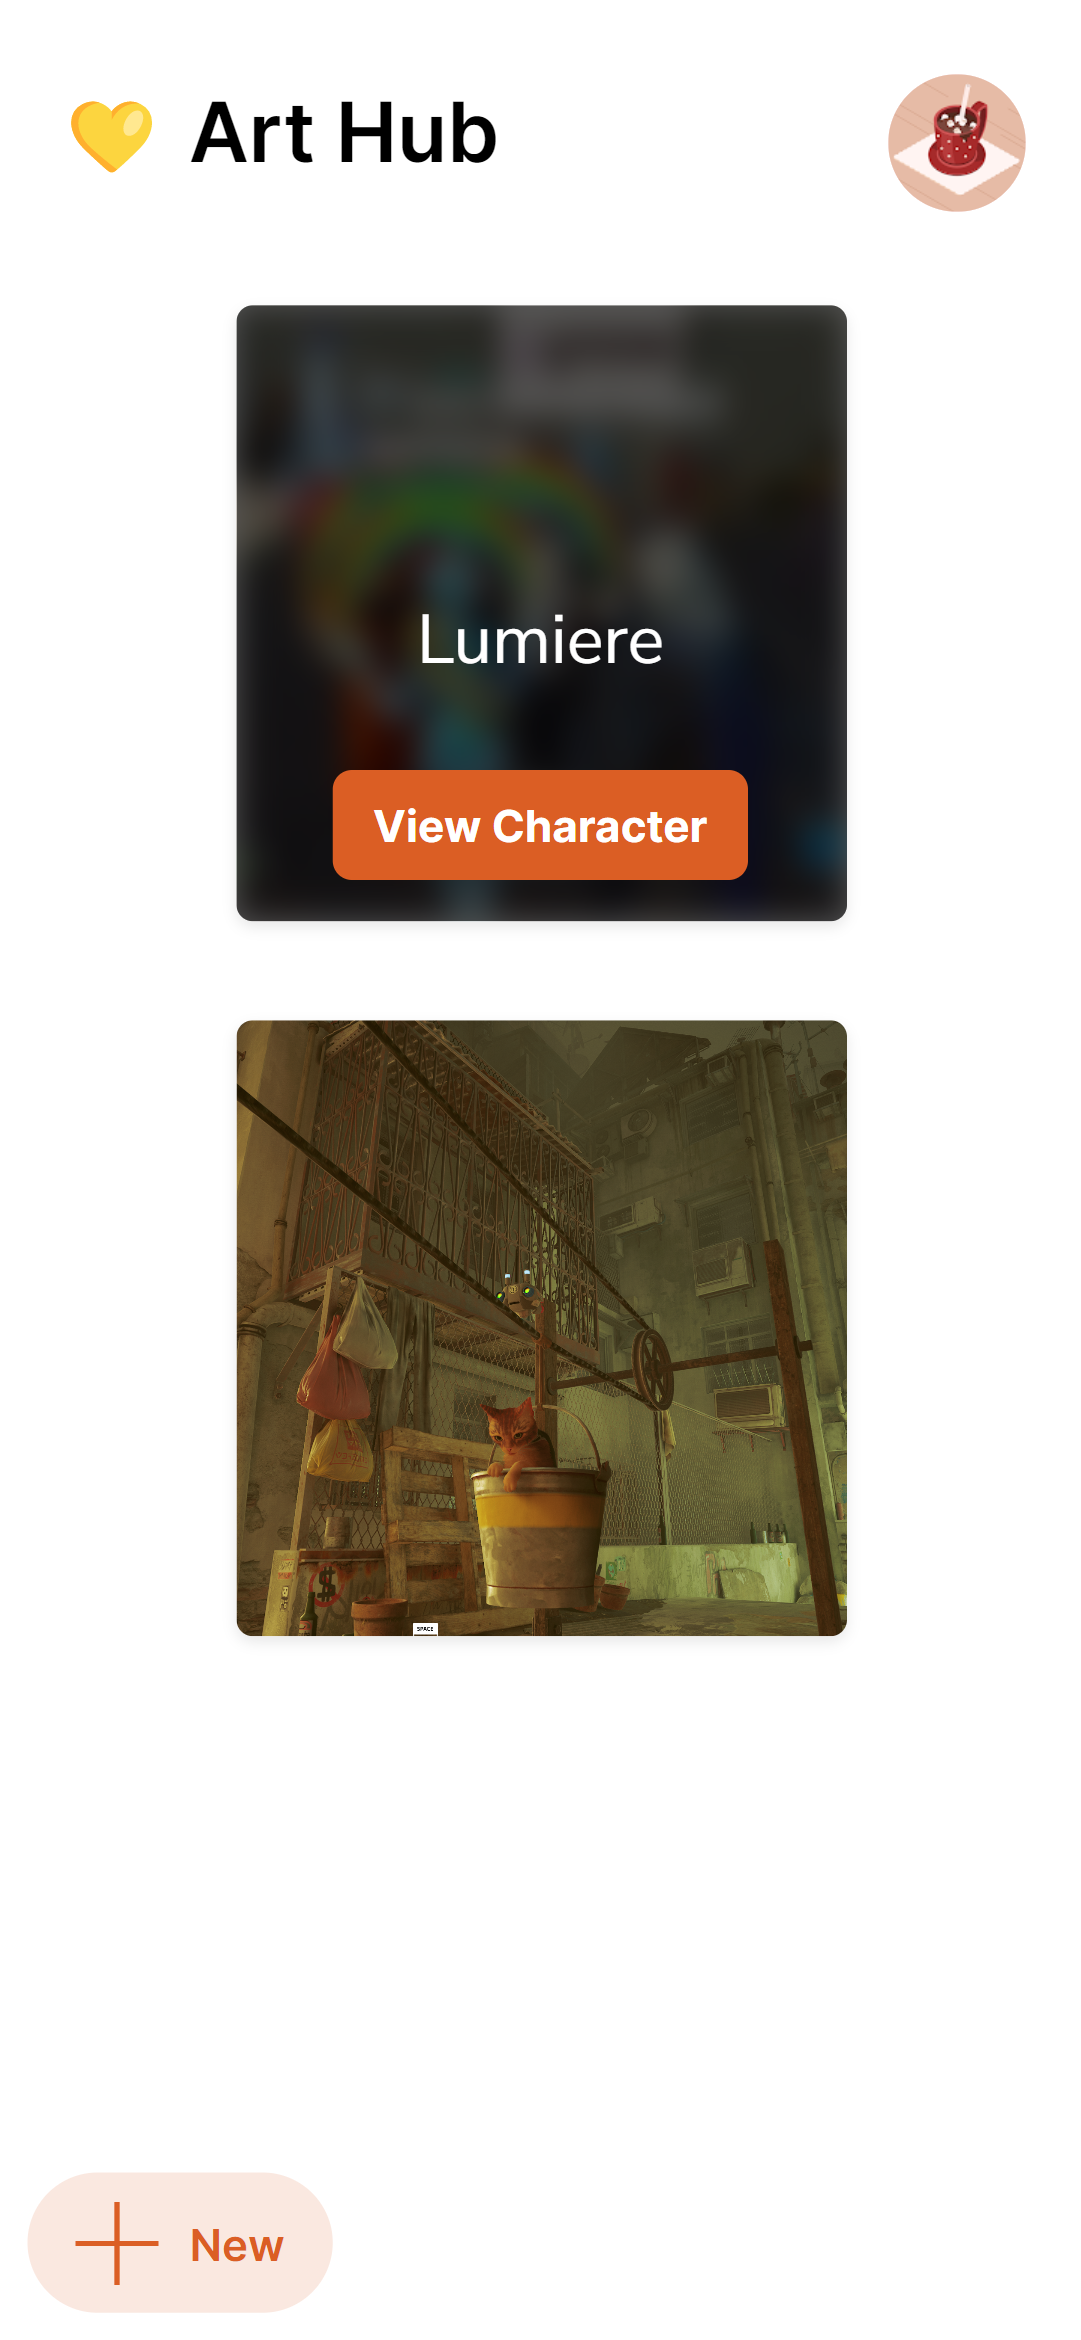 Art Hub web application showing two characters, one named Lumiere.